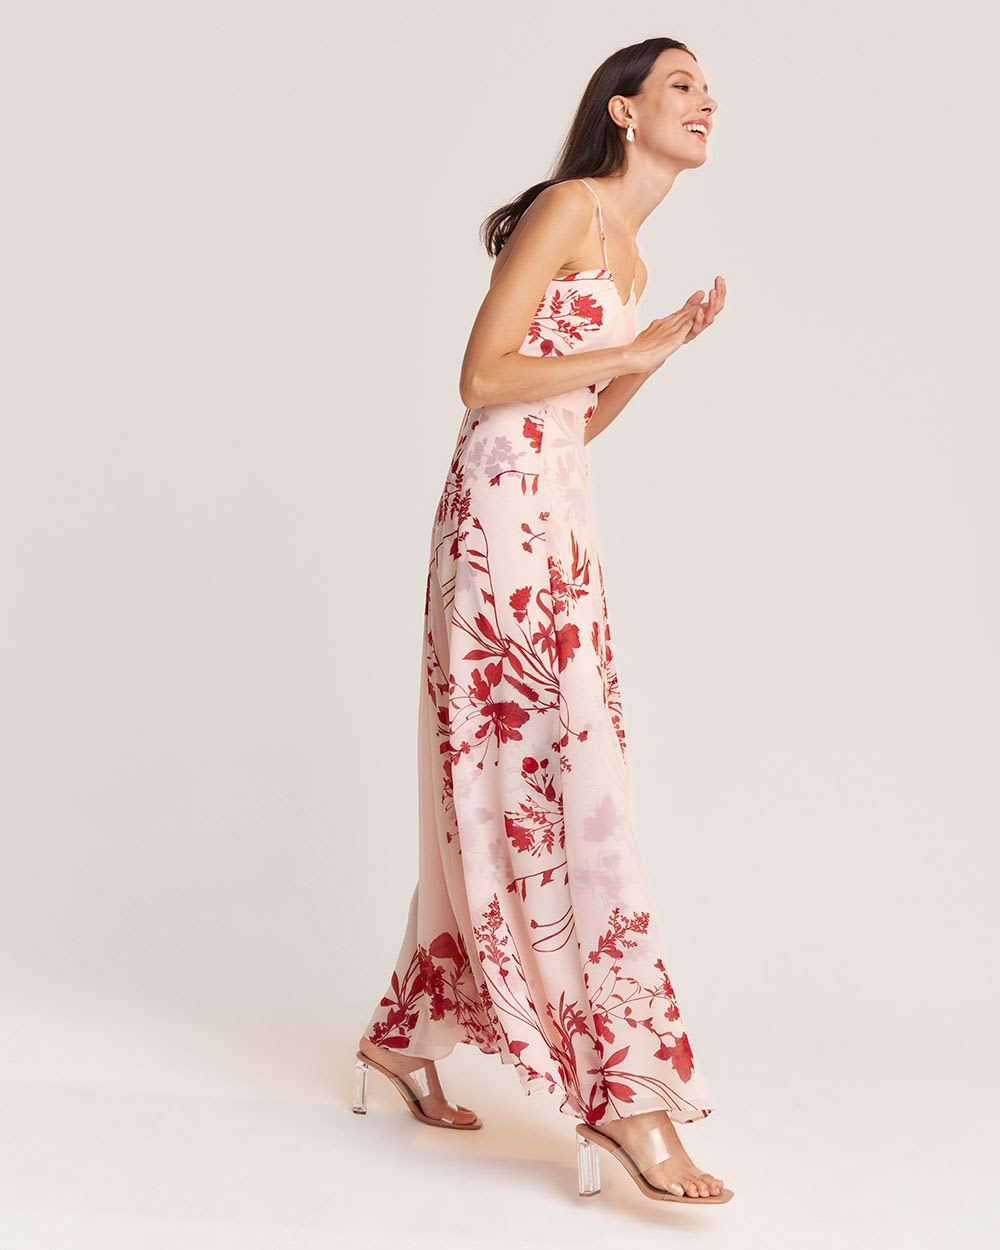 Chiffon Fit and Flare Halter Gown